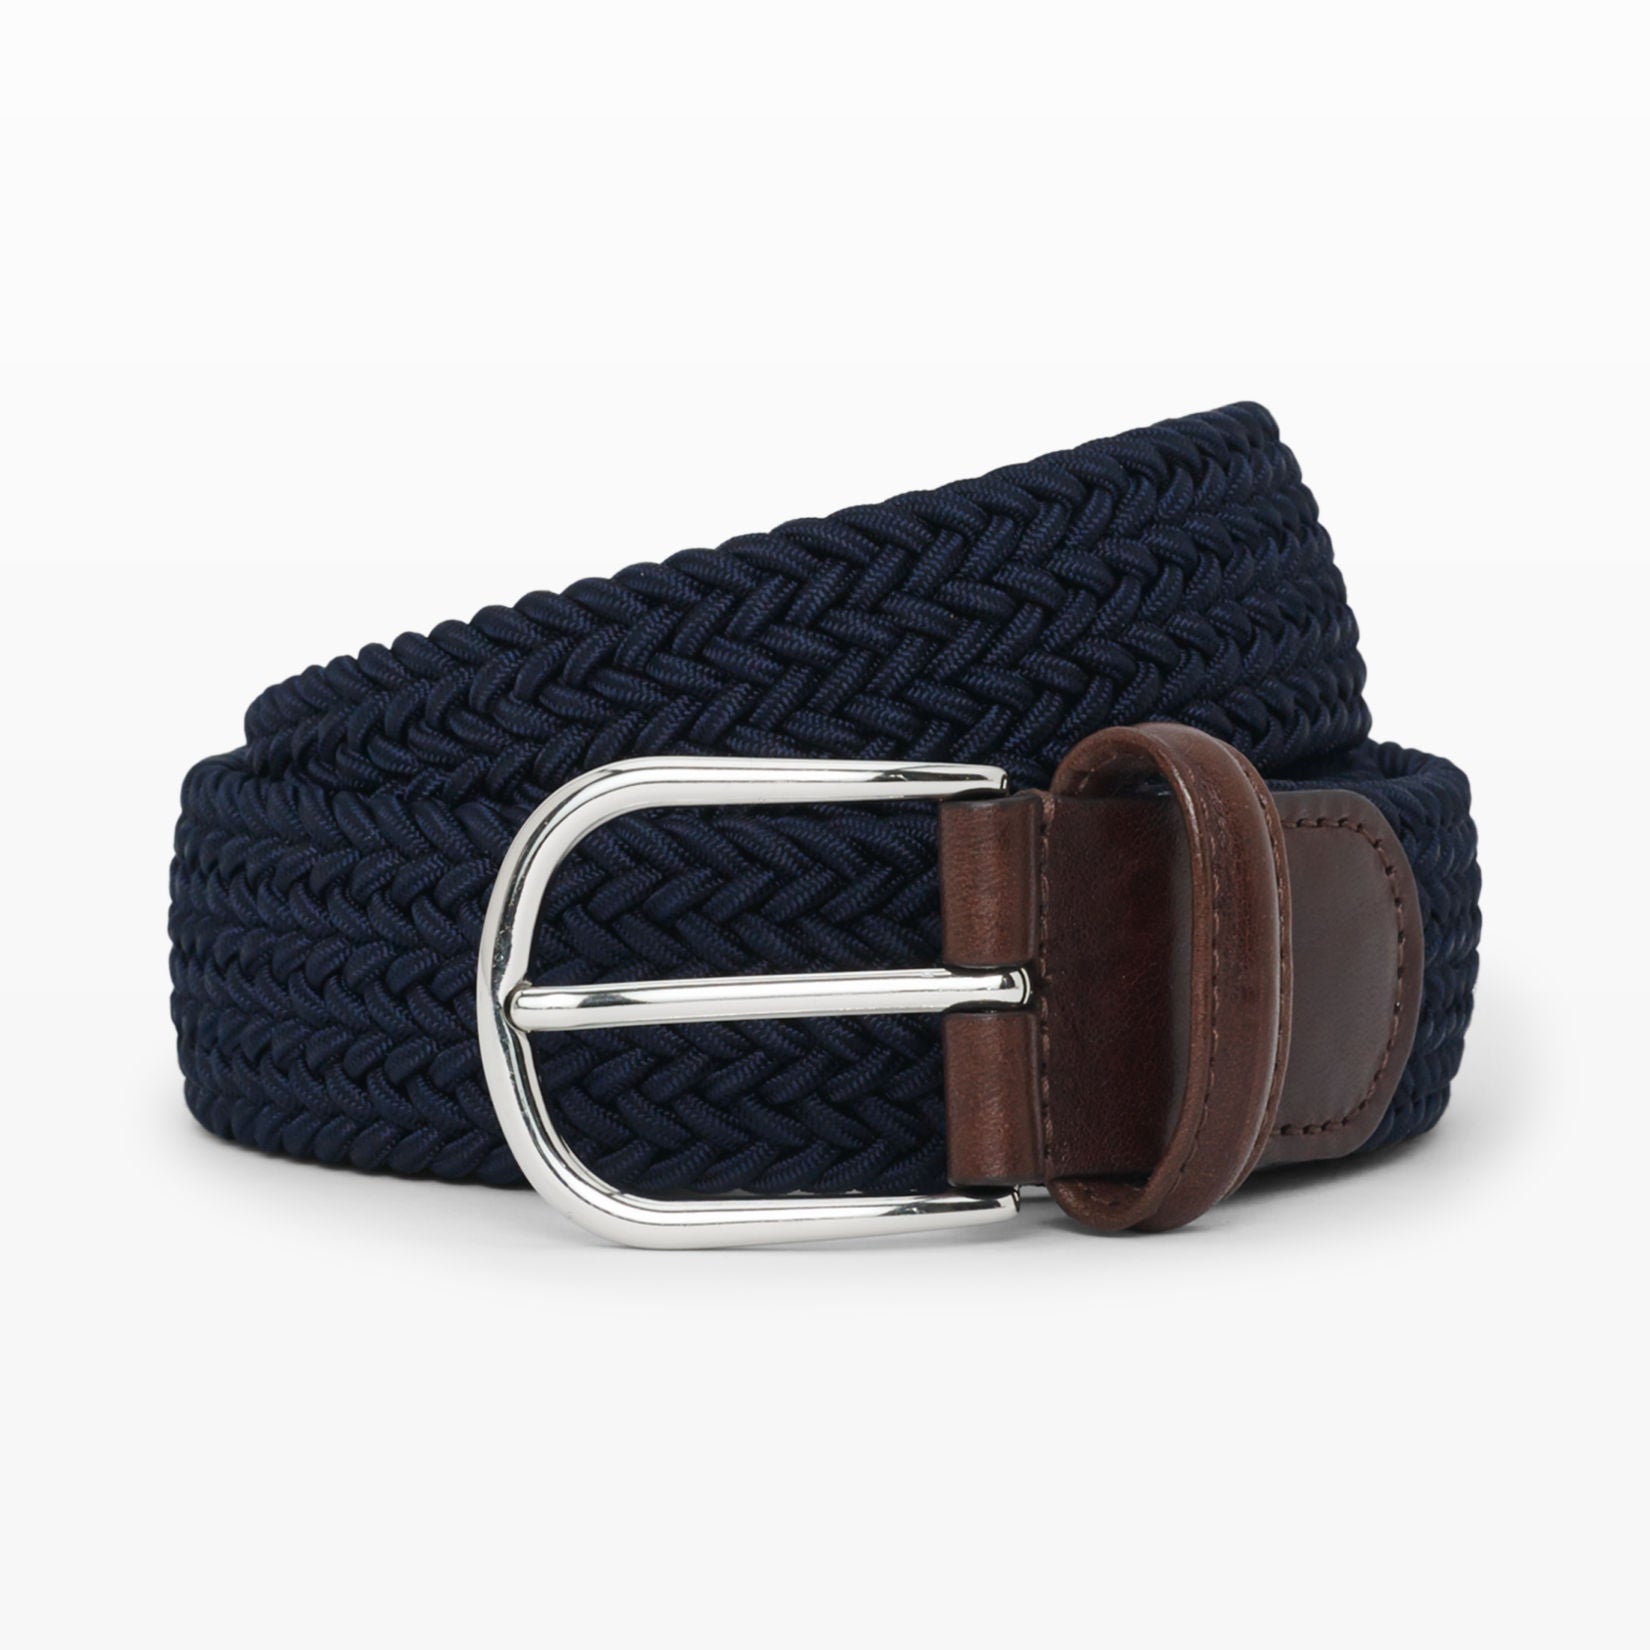 Andersons Basic Stretch Solid Woven Elastic Belt in Navy